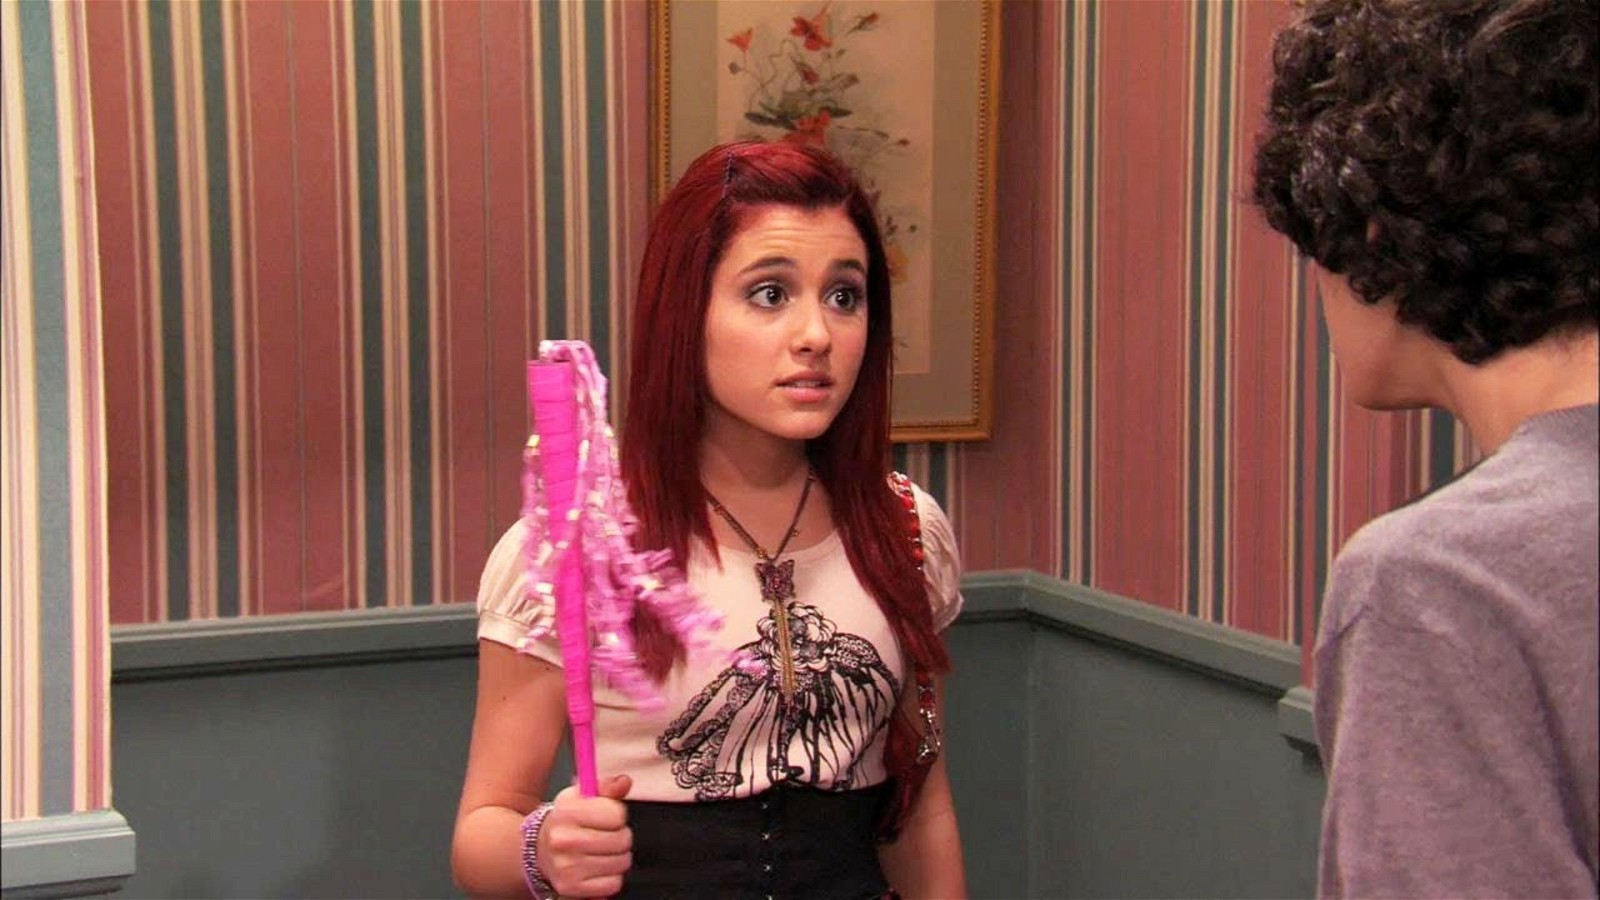 Ariana Grande as Cat Valentine in the Nickelodeon show Victorious